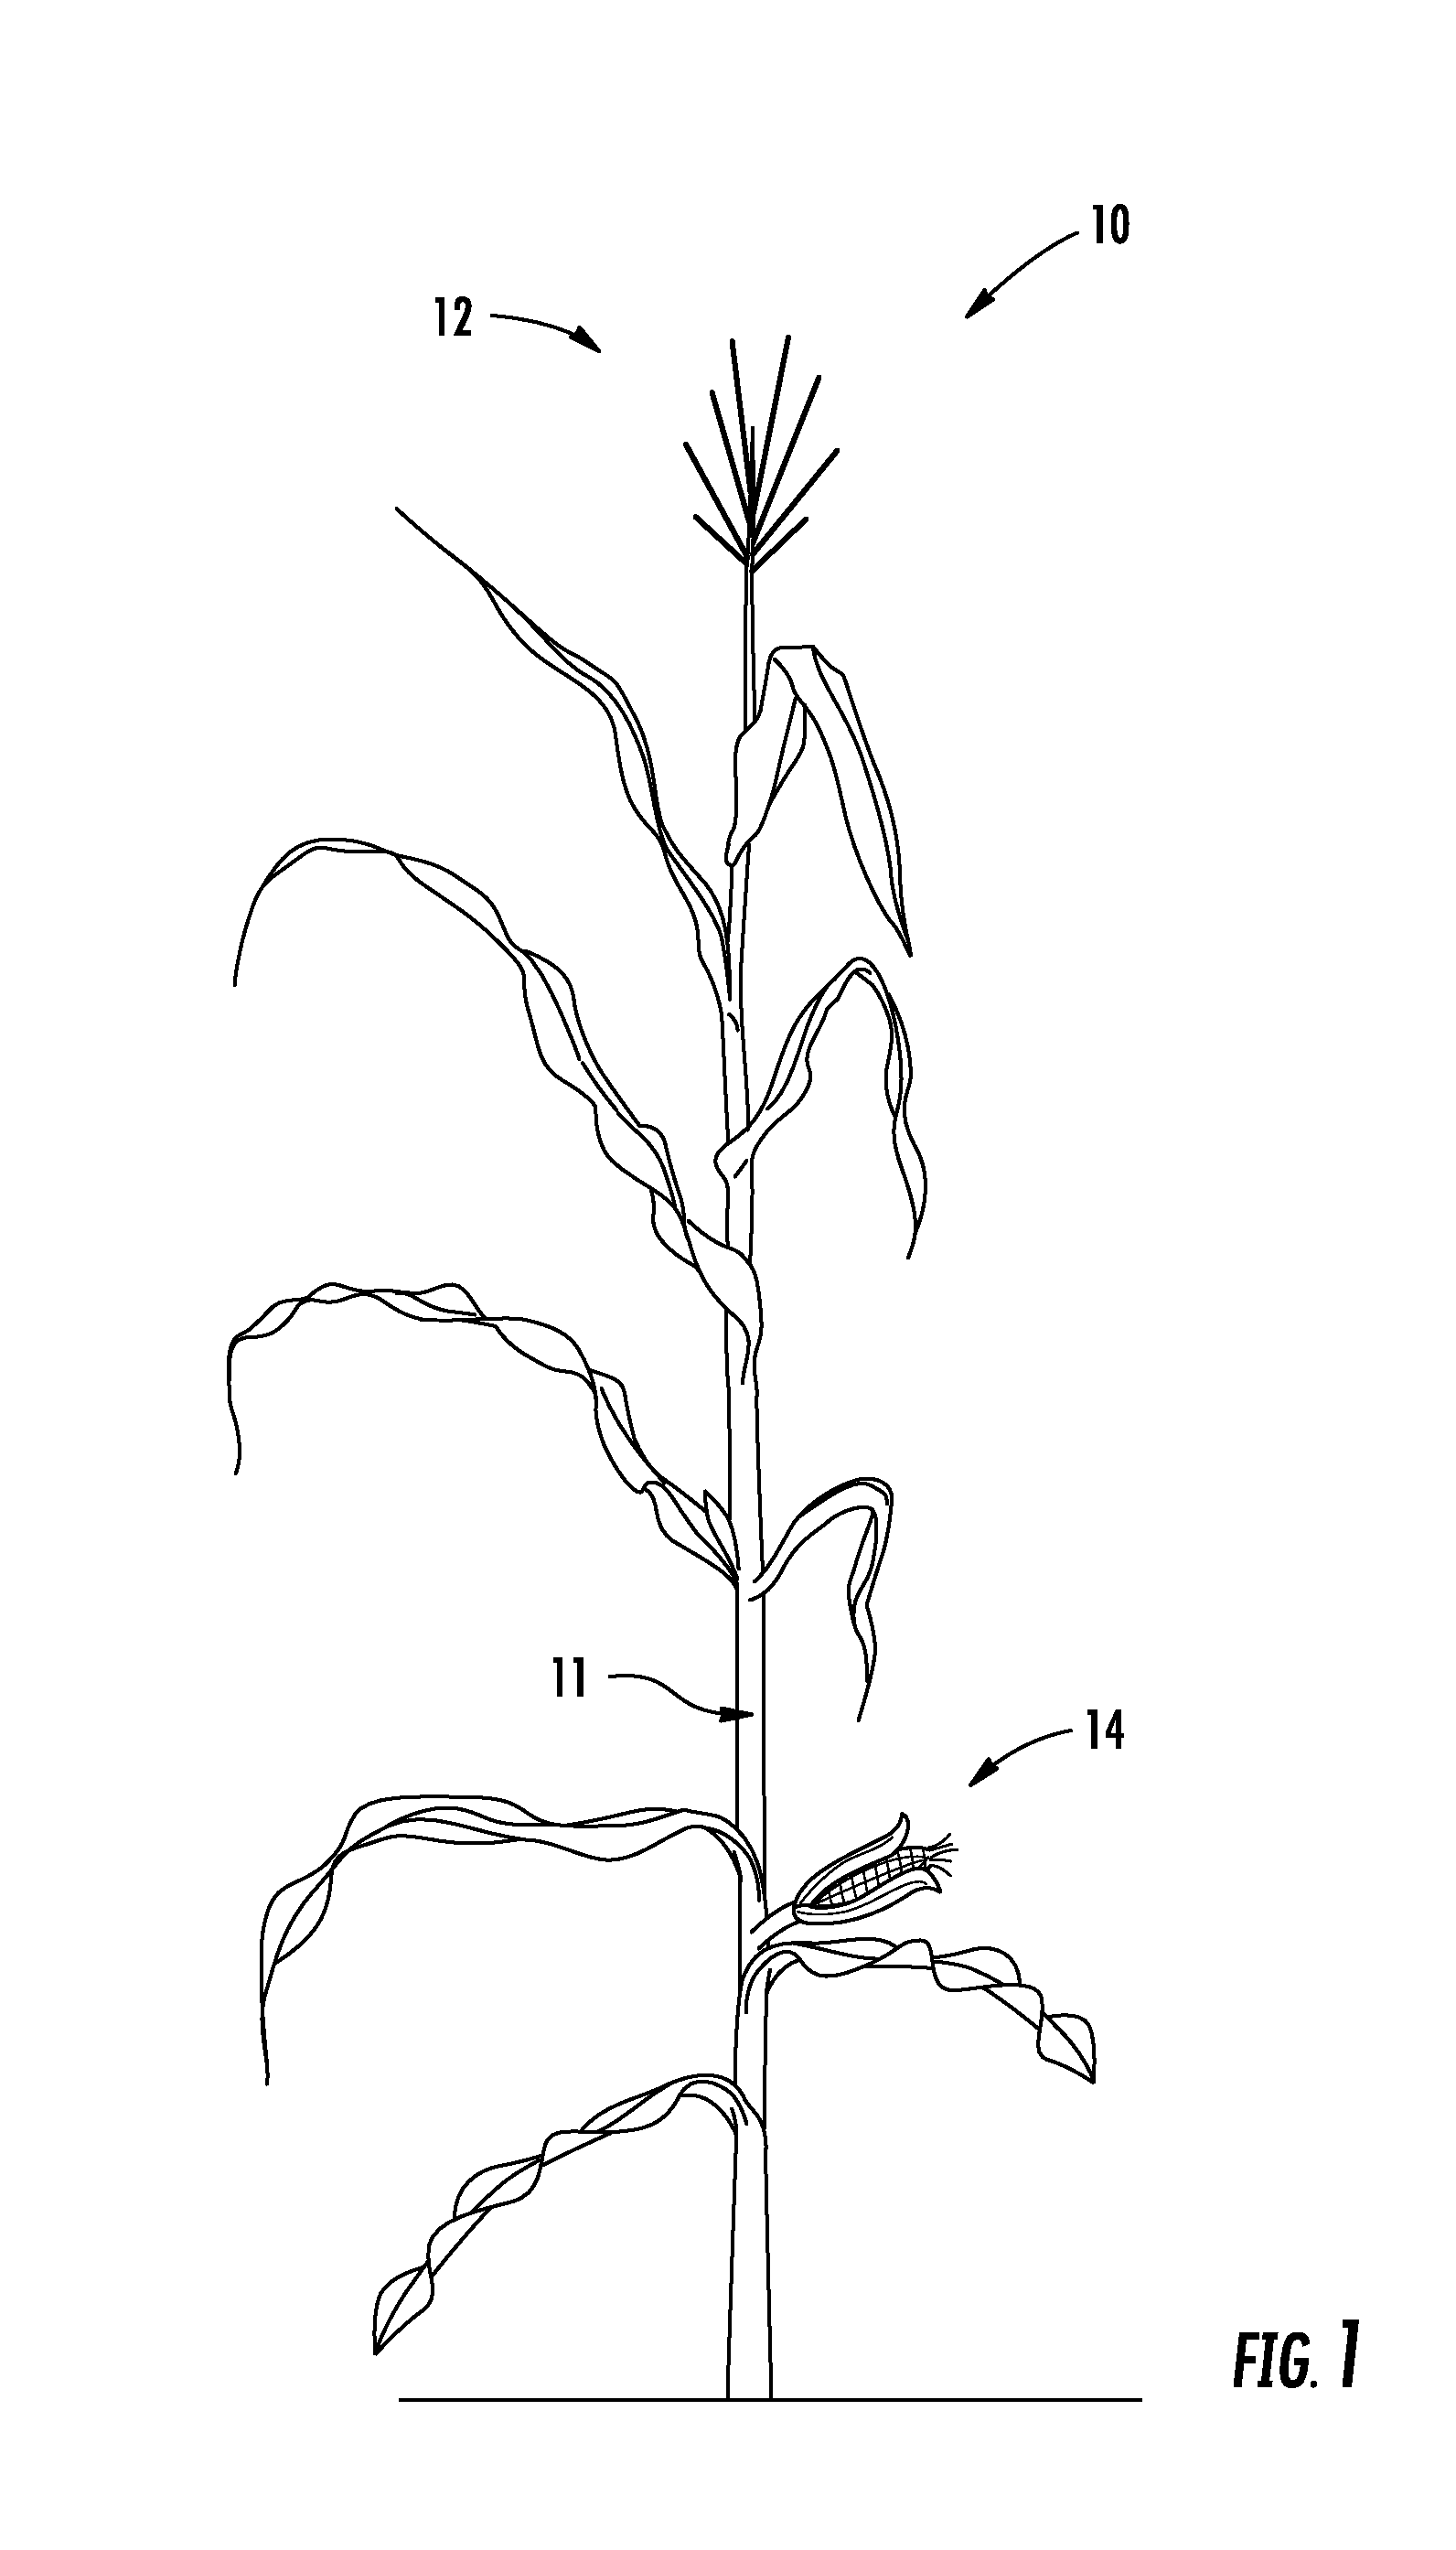 Apparatus and method for delivering pollen for directed pollination of plants